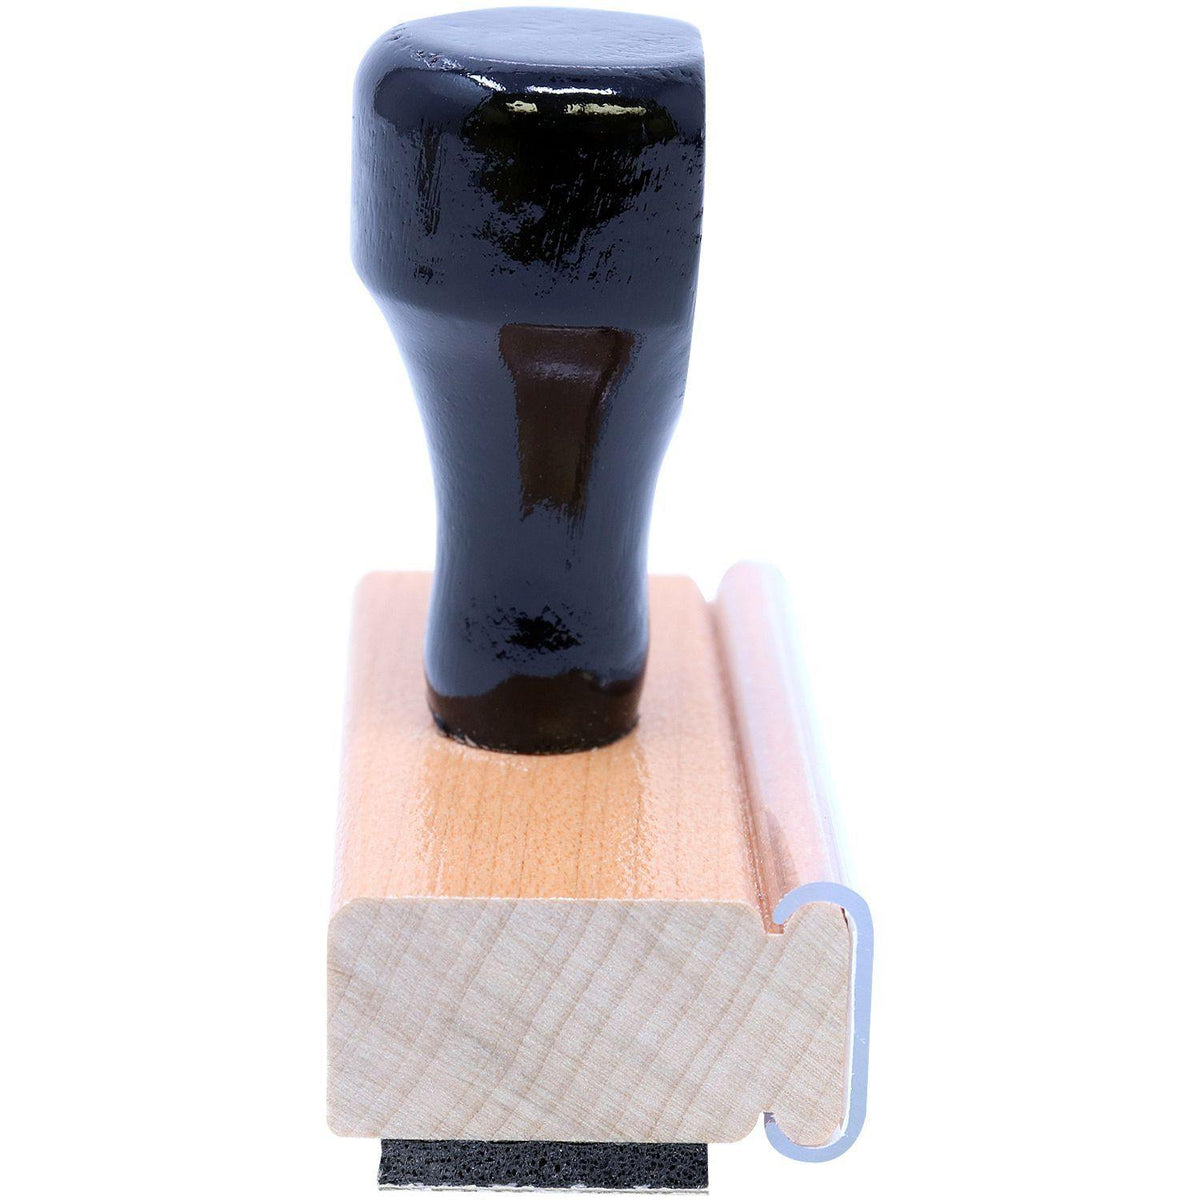 Legal Witness Rubber Stamp - Engineer Seal Stamps - Brand_Acorn, Impression Size_Small, Stamp Type_Regular Stamp, Type of Use_Legal